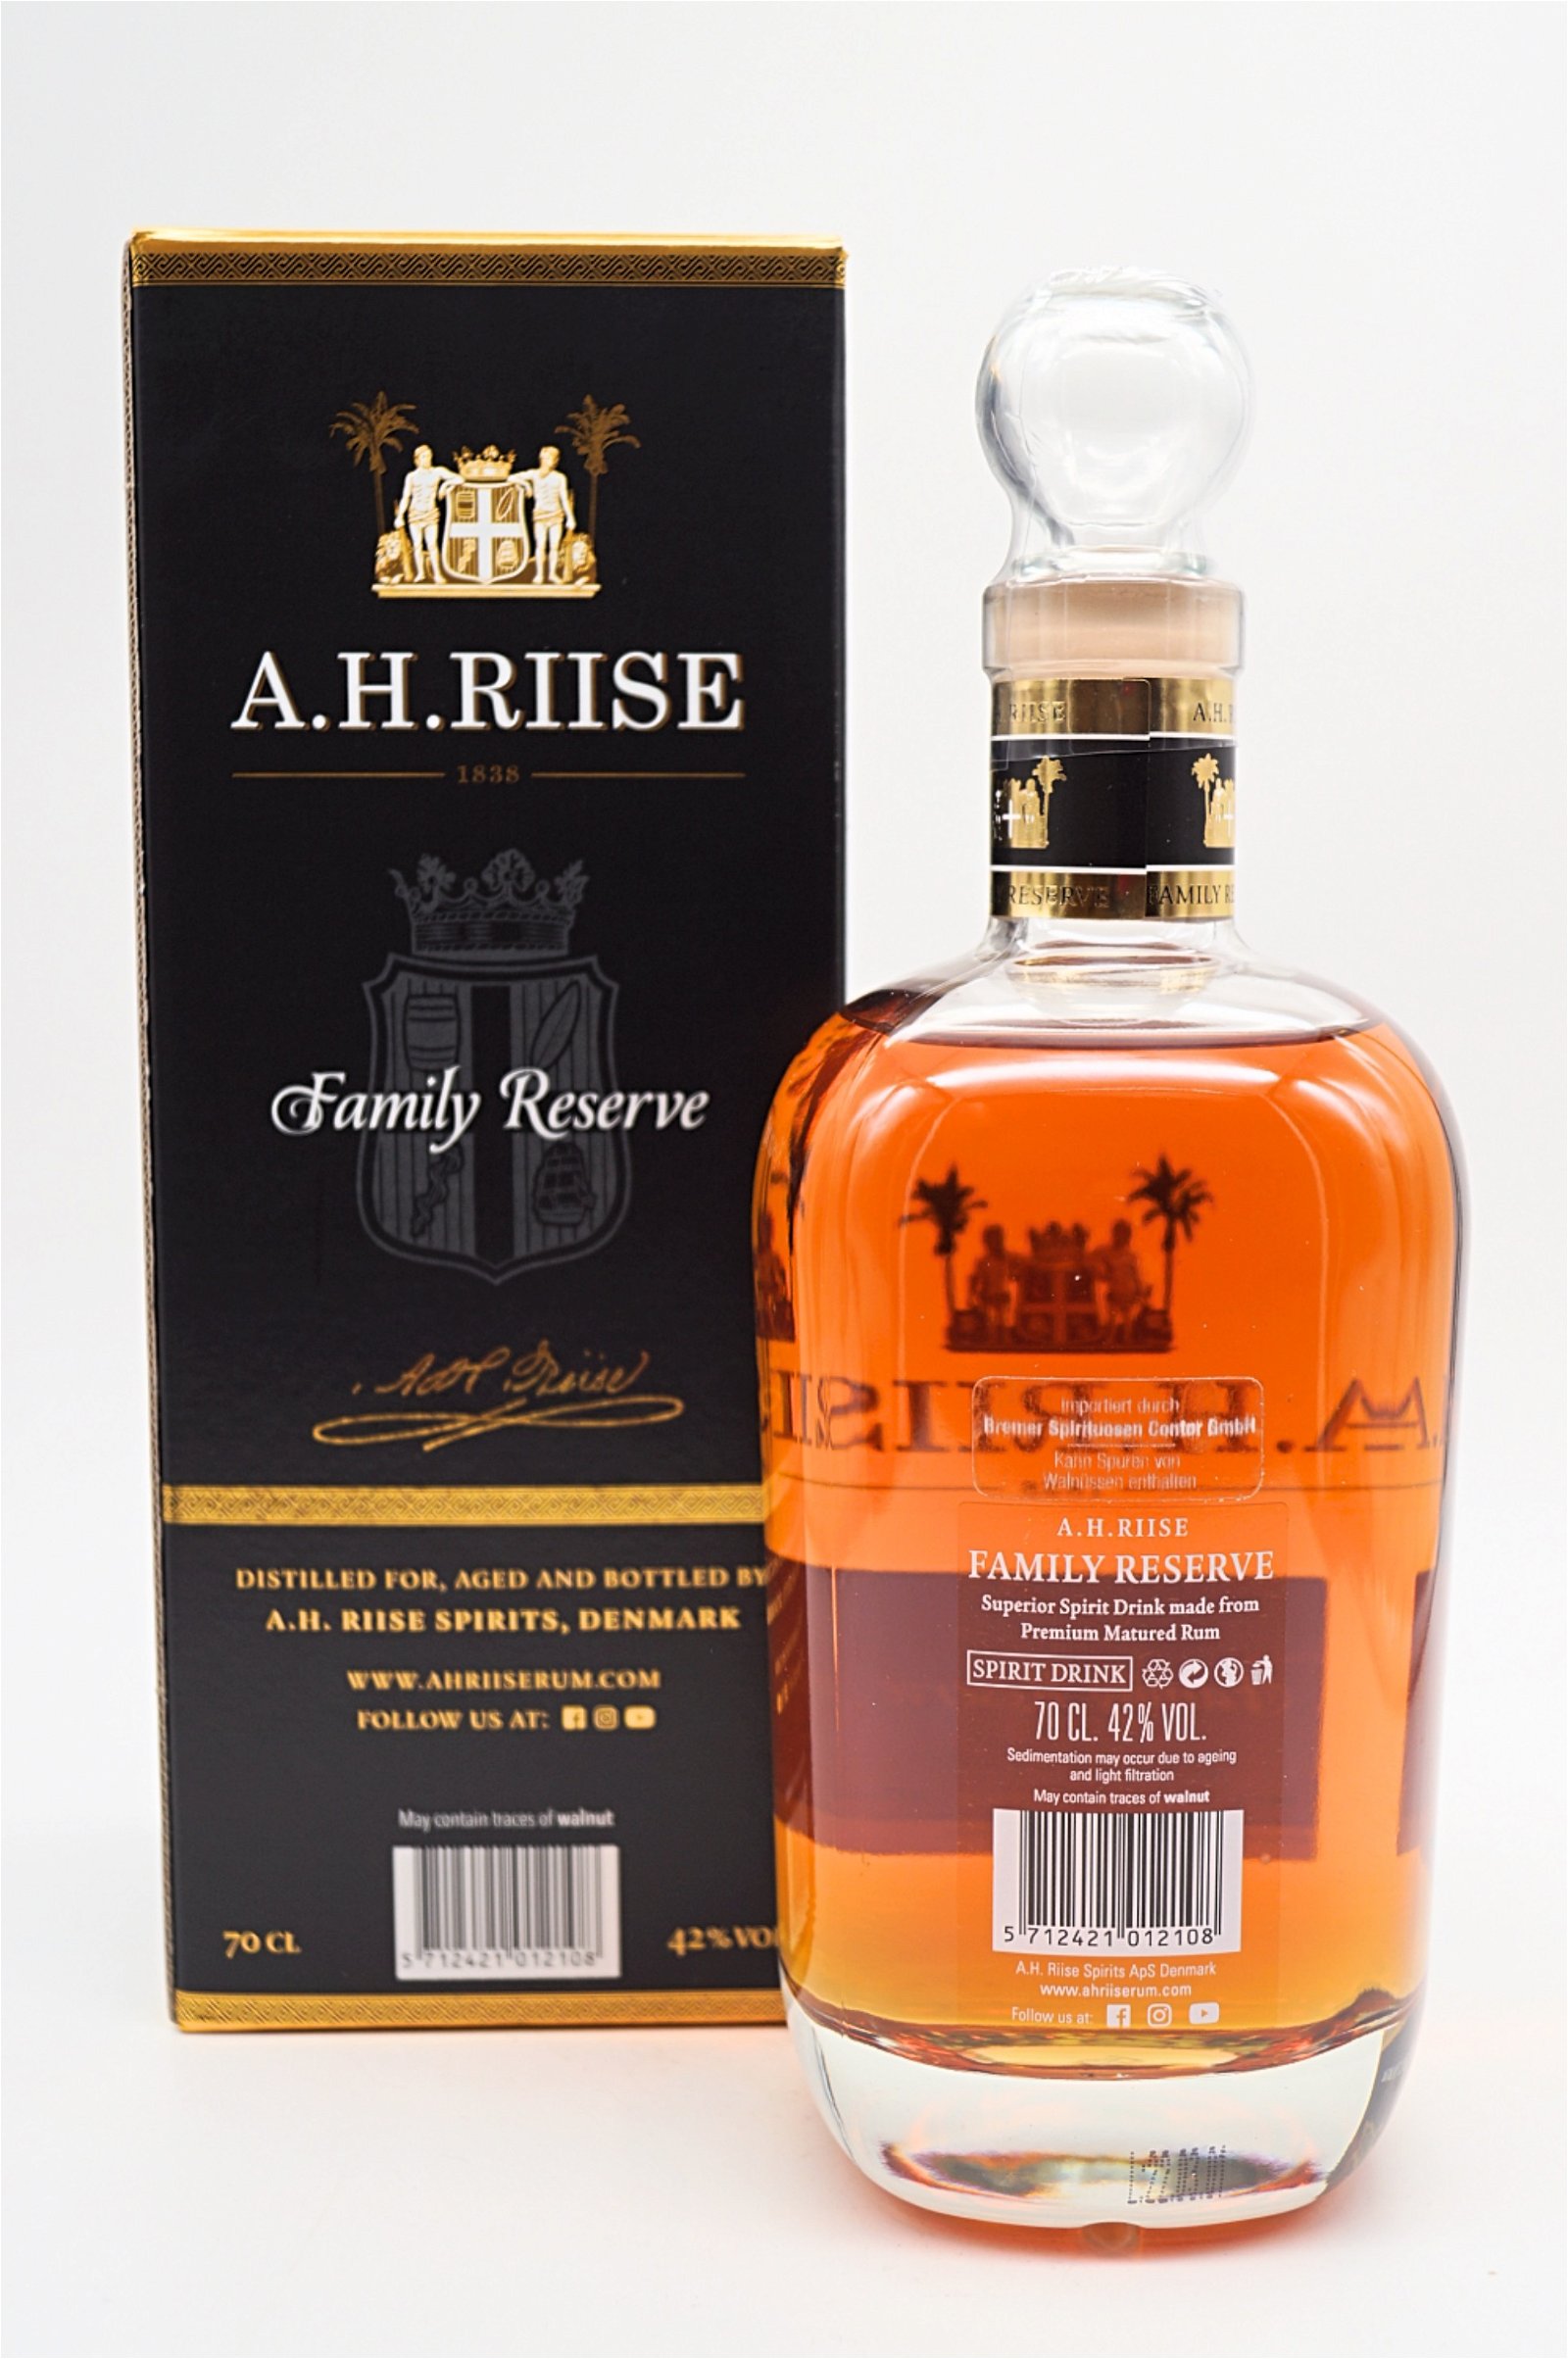 A.H. Riise Family Reserve Rum Solera 1838